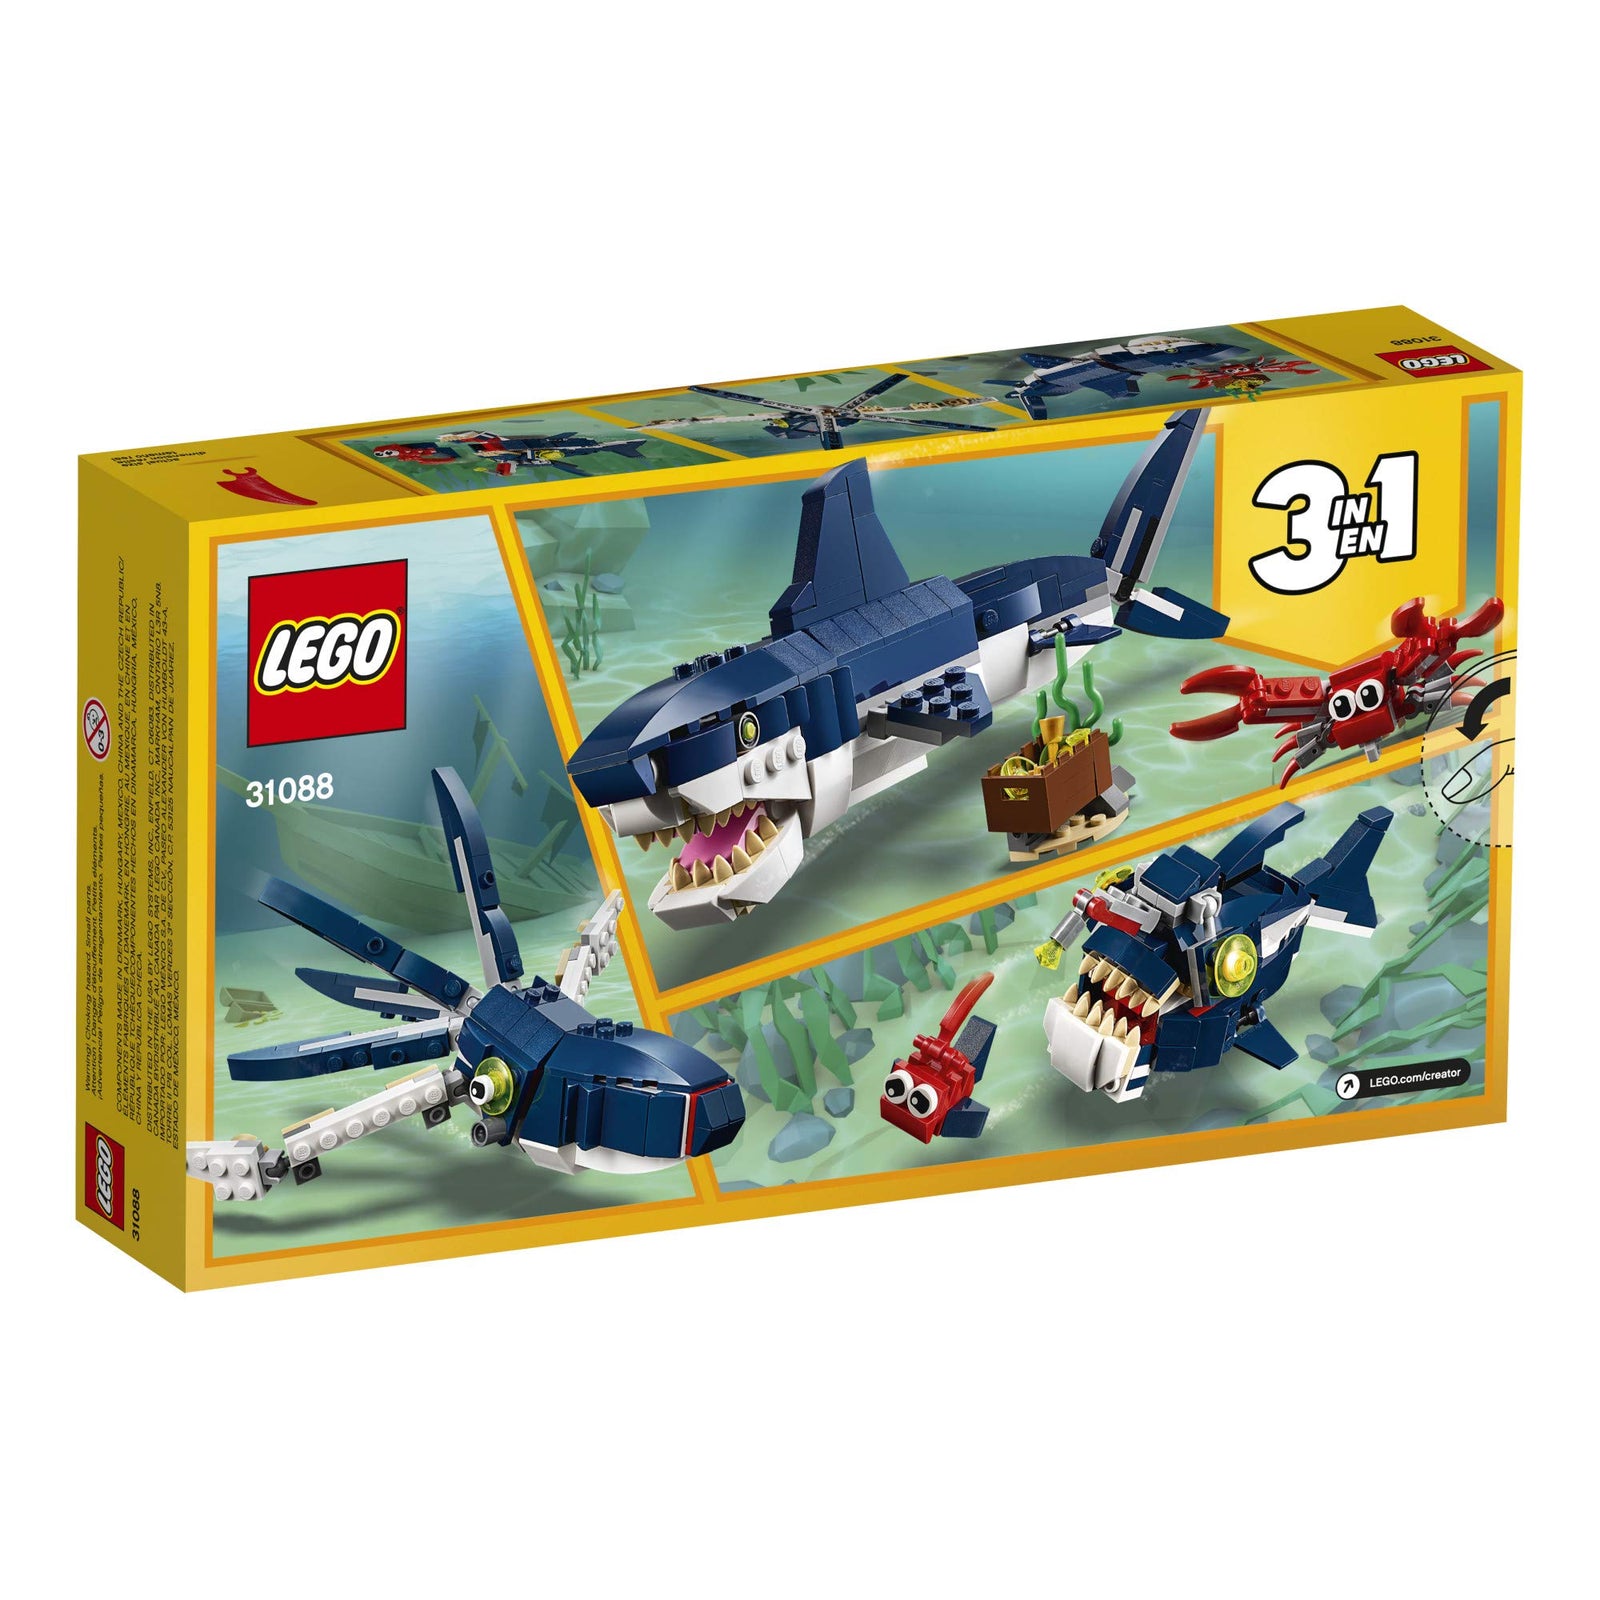 LEGO Creator 3in1 Deep Sea Creatures 31088 Make a Shark, Squid, Angler Fish, and Crab with This Sea Animal Toy Building Kit (230 Pieces)